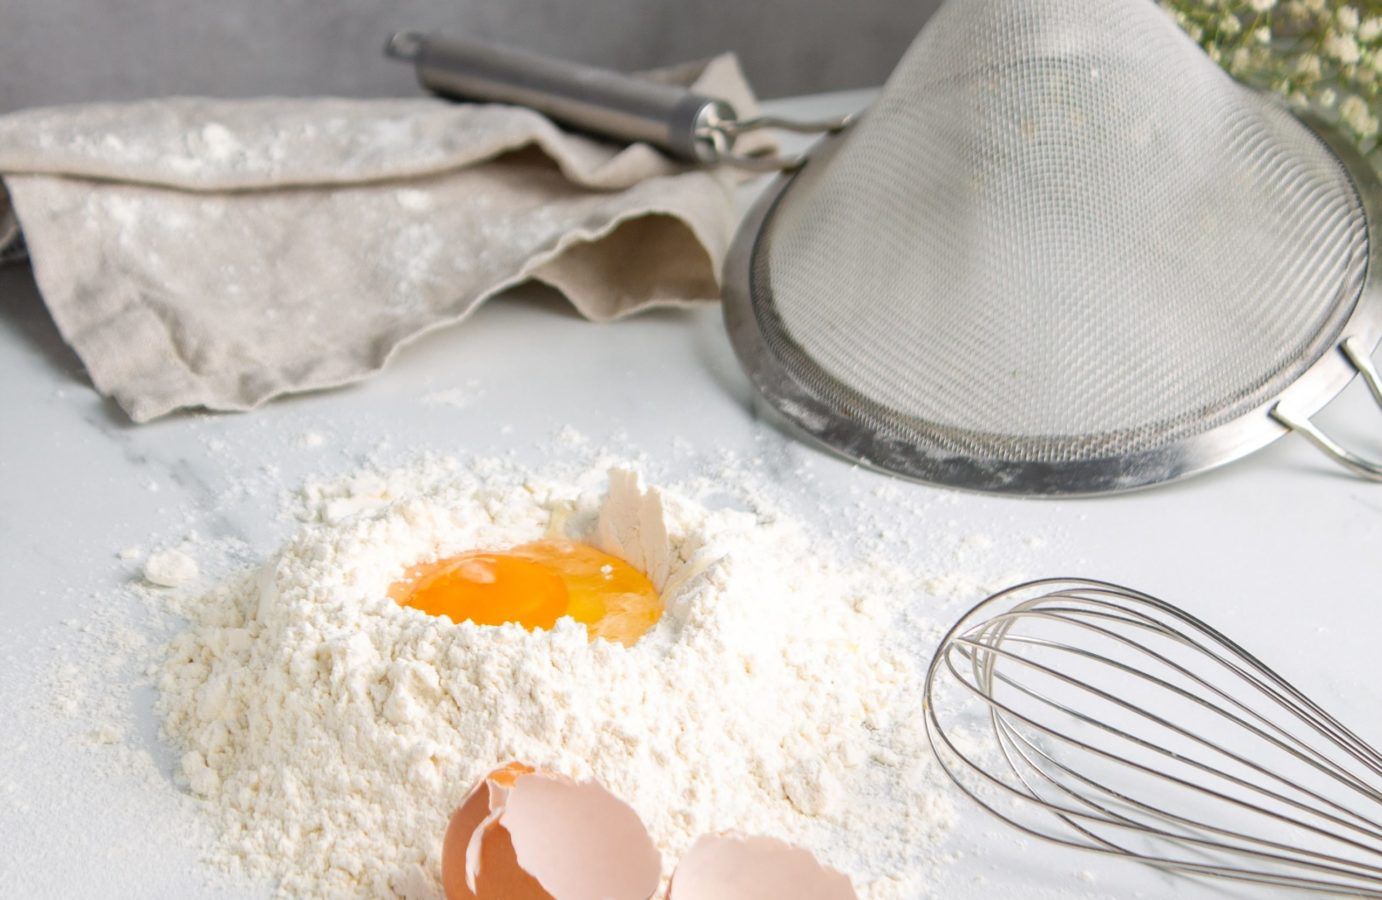 How to minimise waste during baking – French pastry chefs offers tips